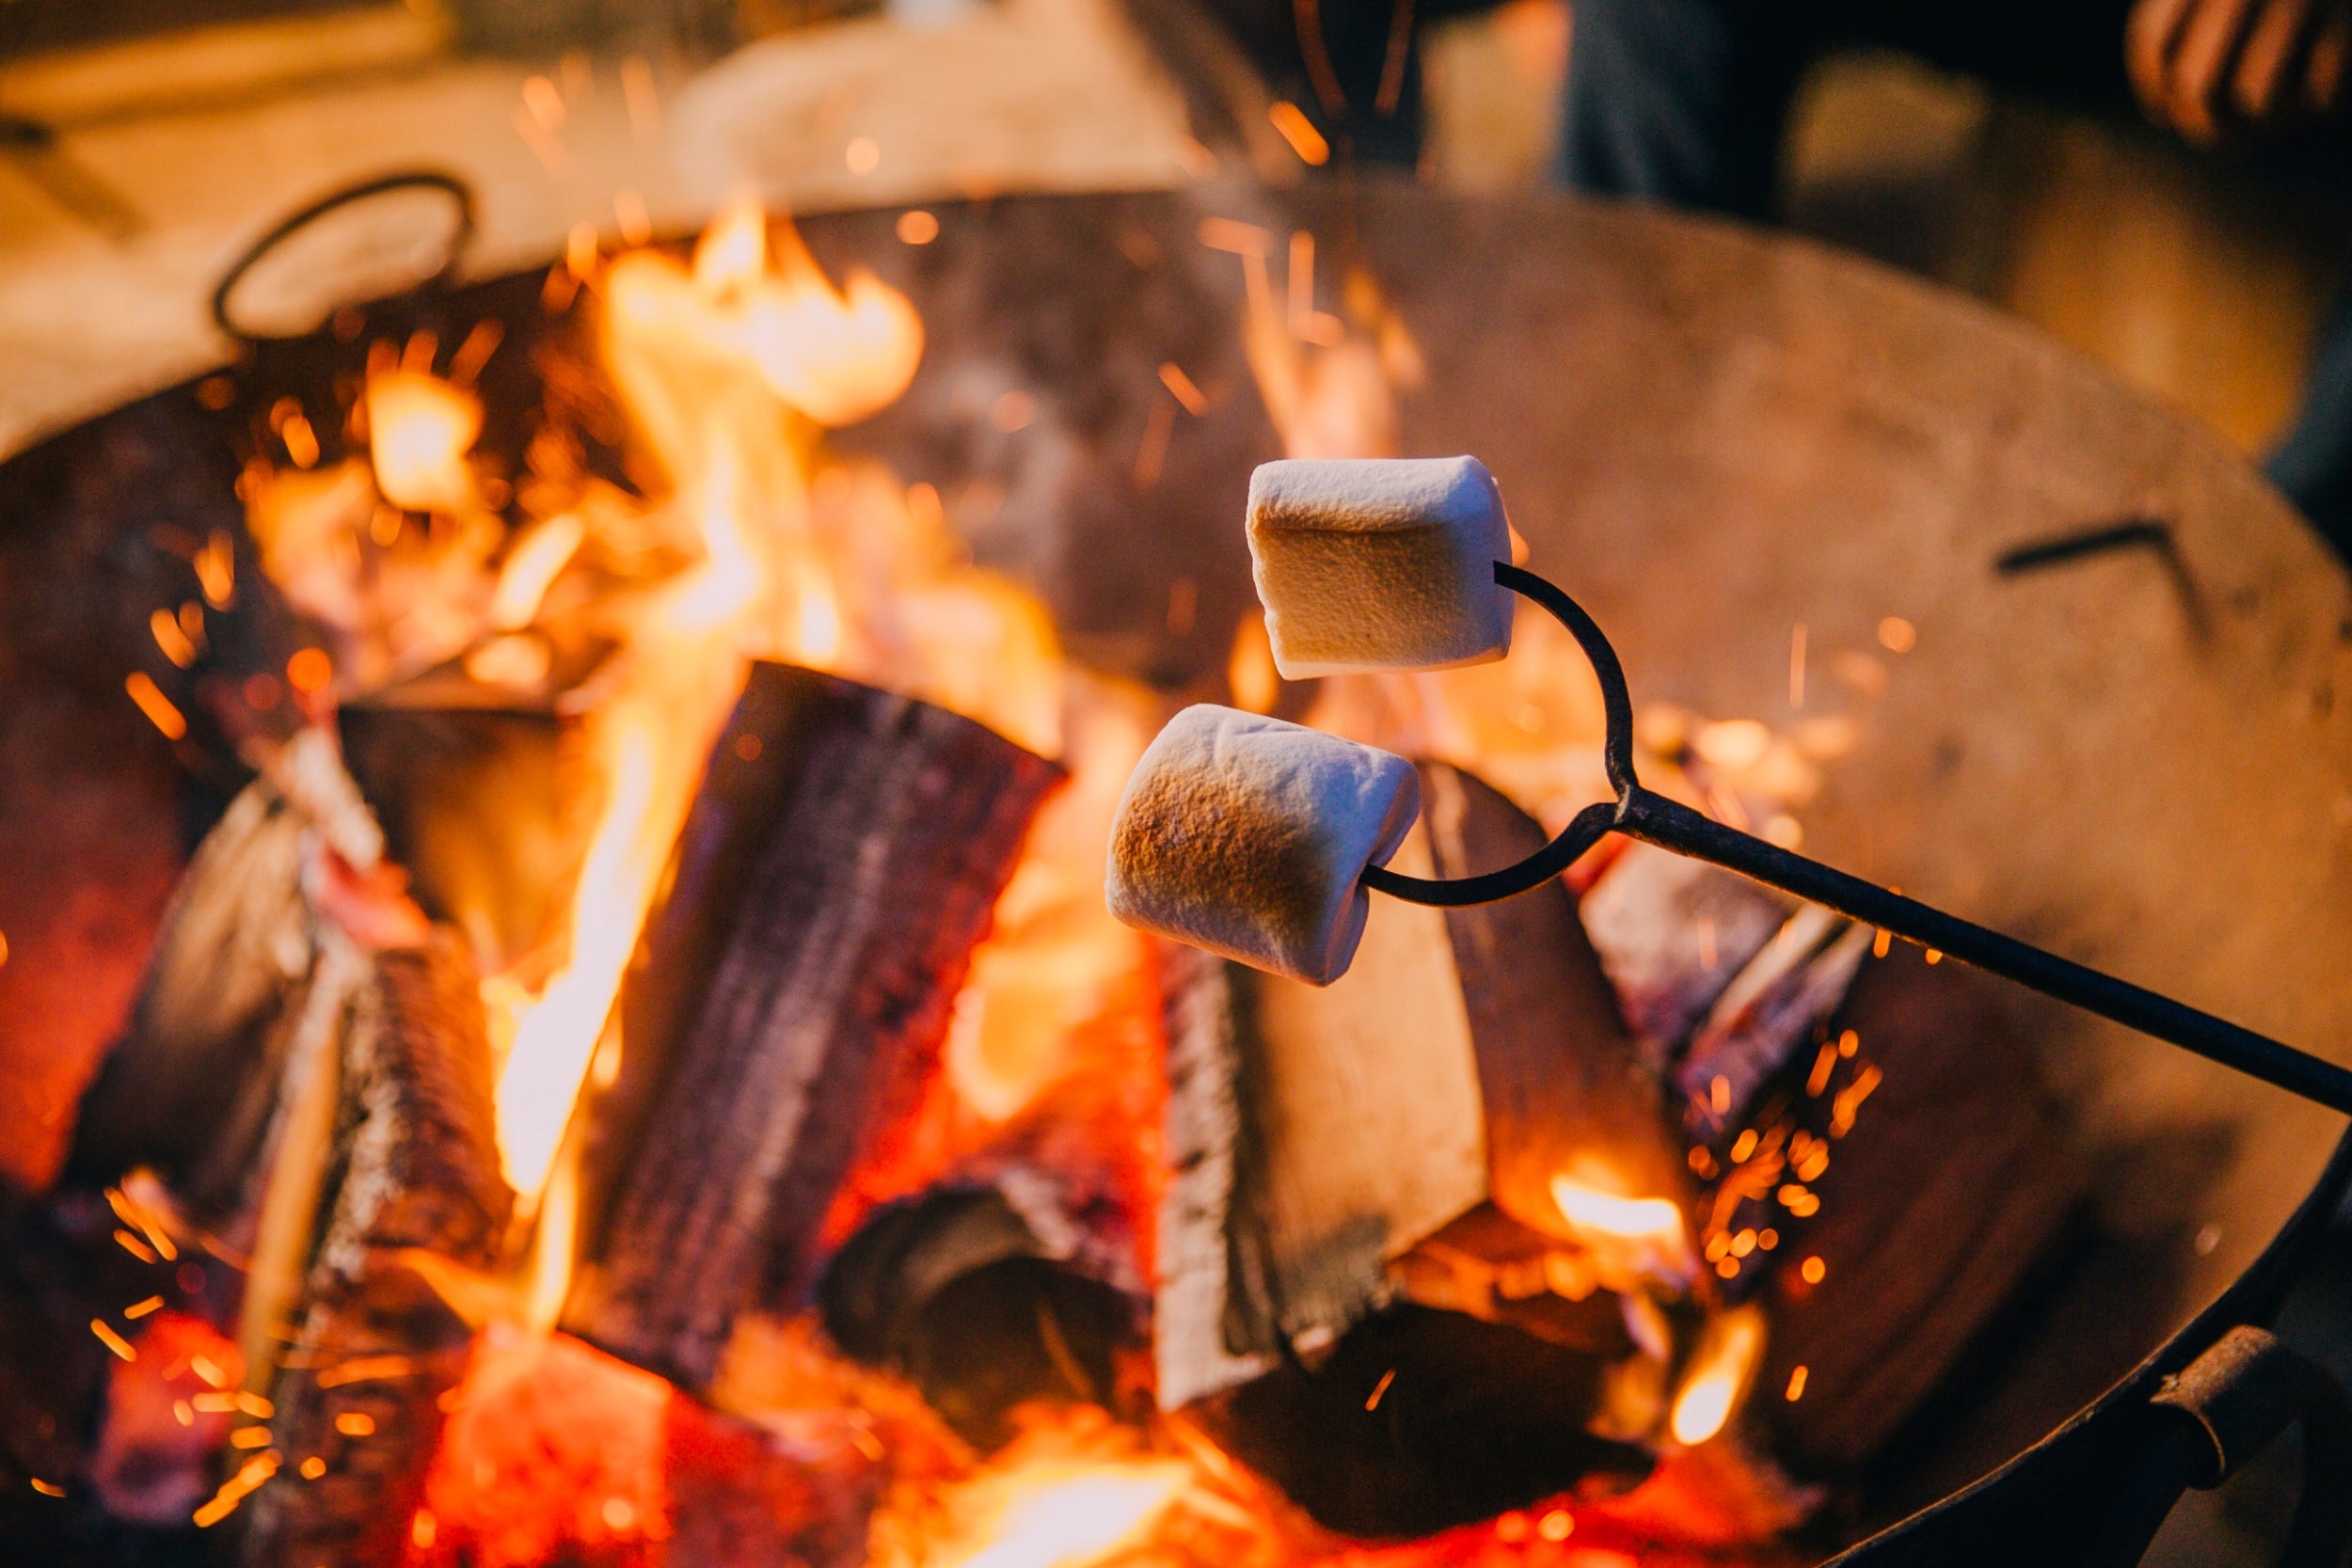 Bring marshmallows, the quintessential camping snack